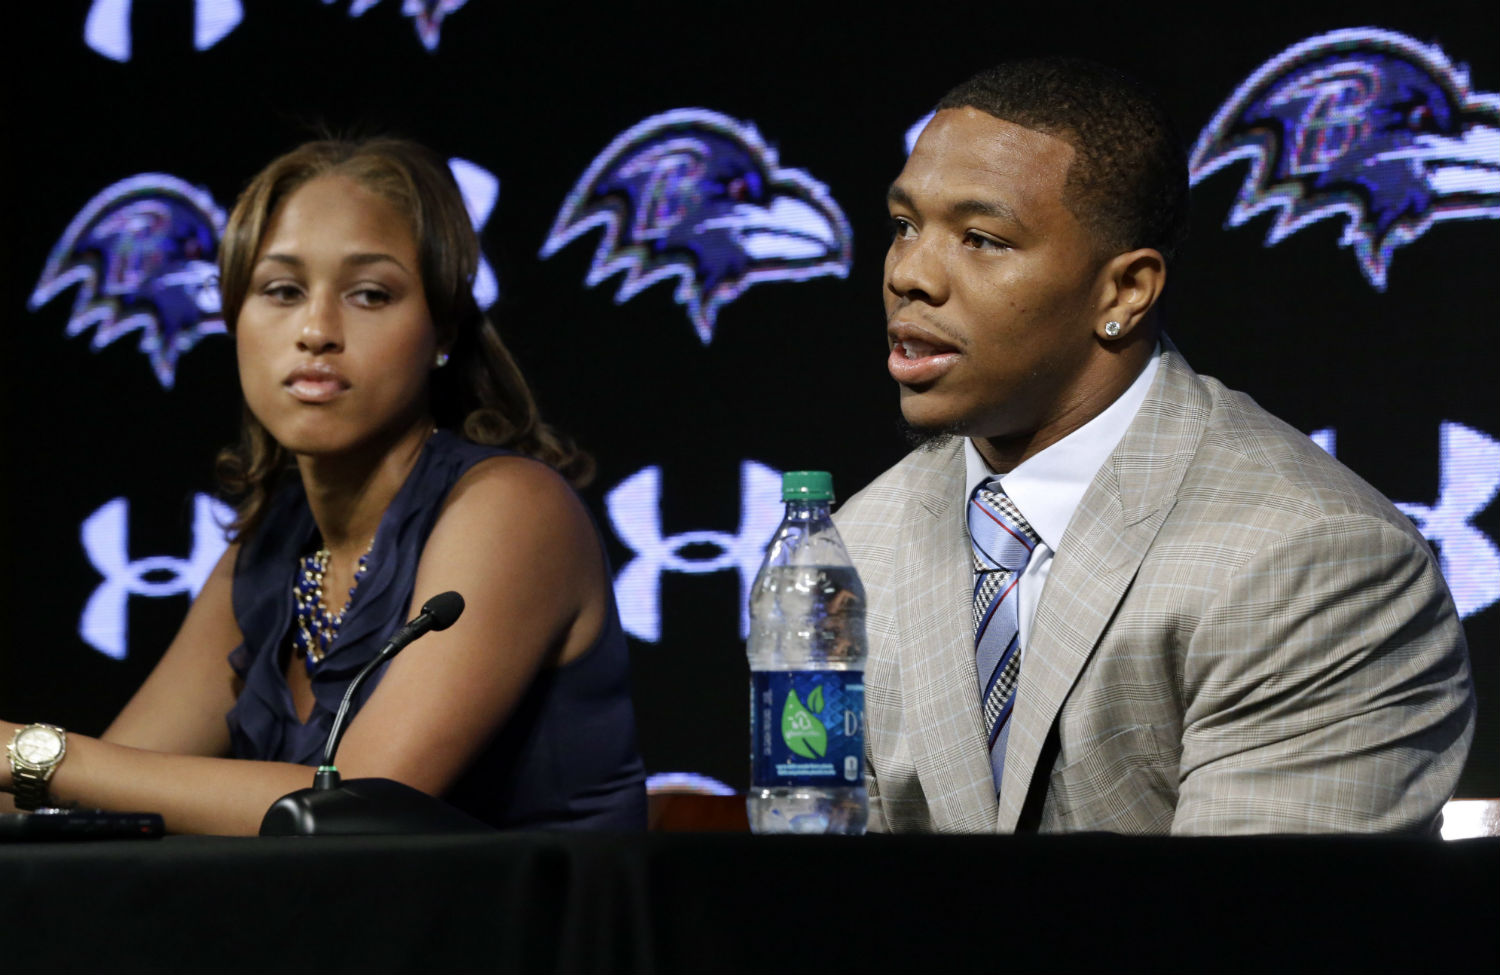 Pure Poison: The UCSB Shooting, Ray Rice and a Culture of Violence Against Women